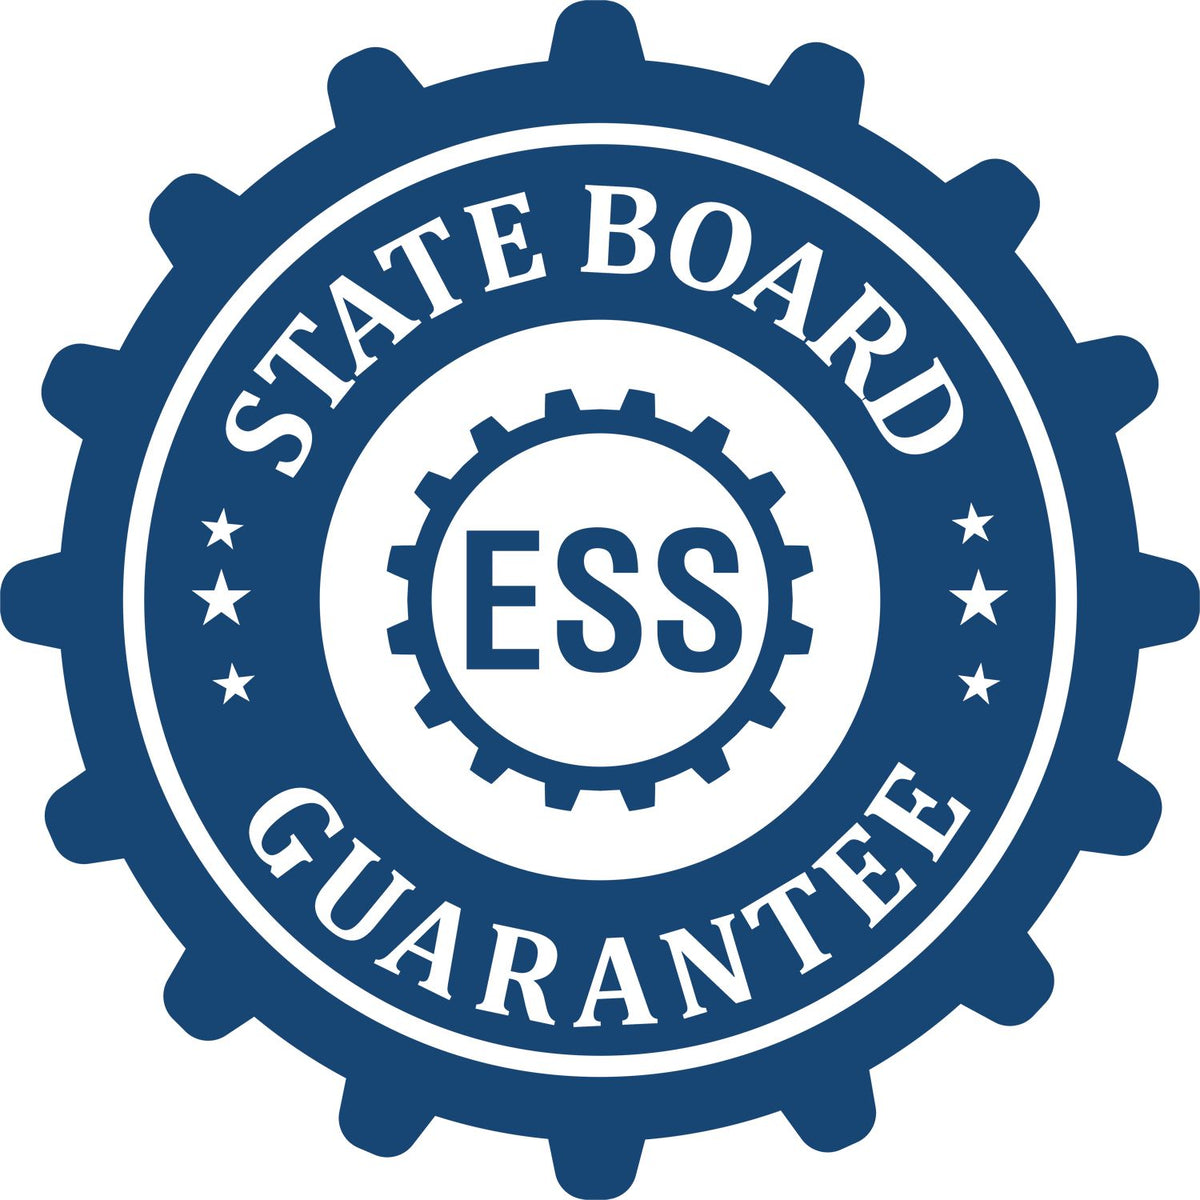 An emblem in a gear shape illustrating a state board guarantee for the Hybrid Maine Land Surveyor Seal